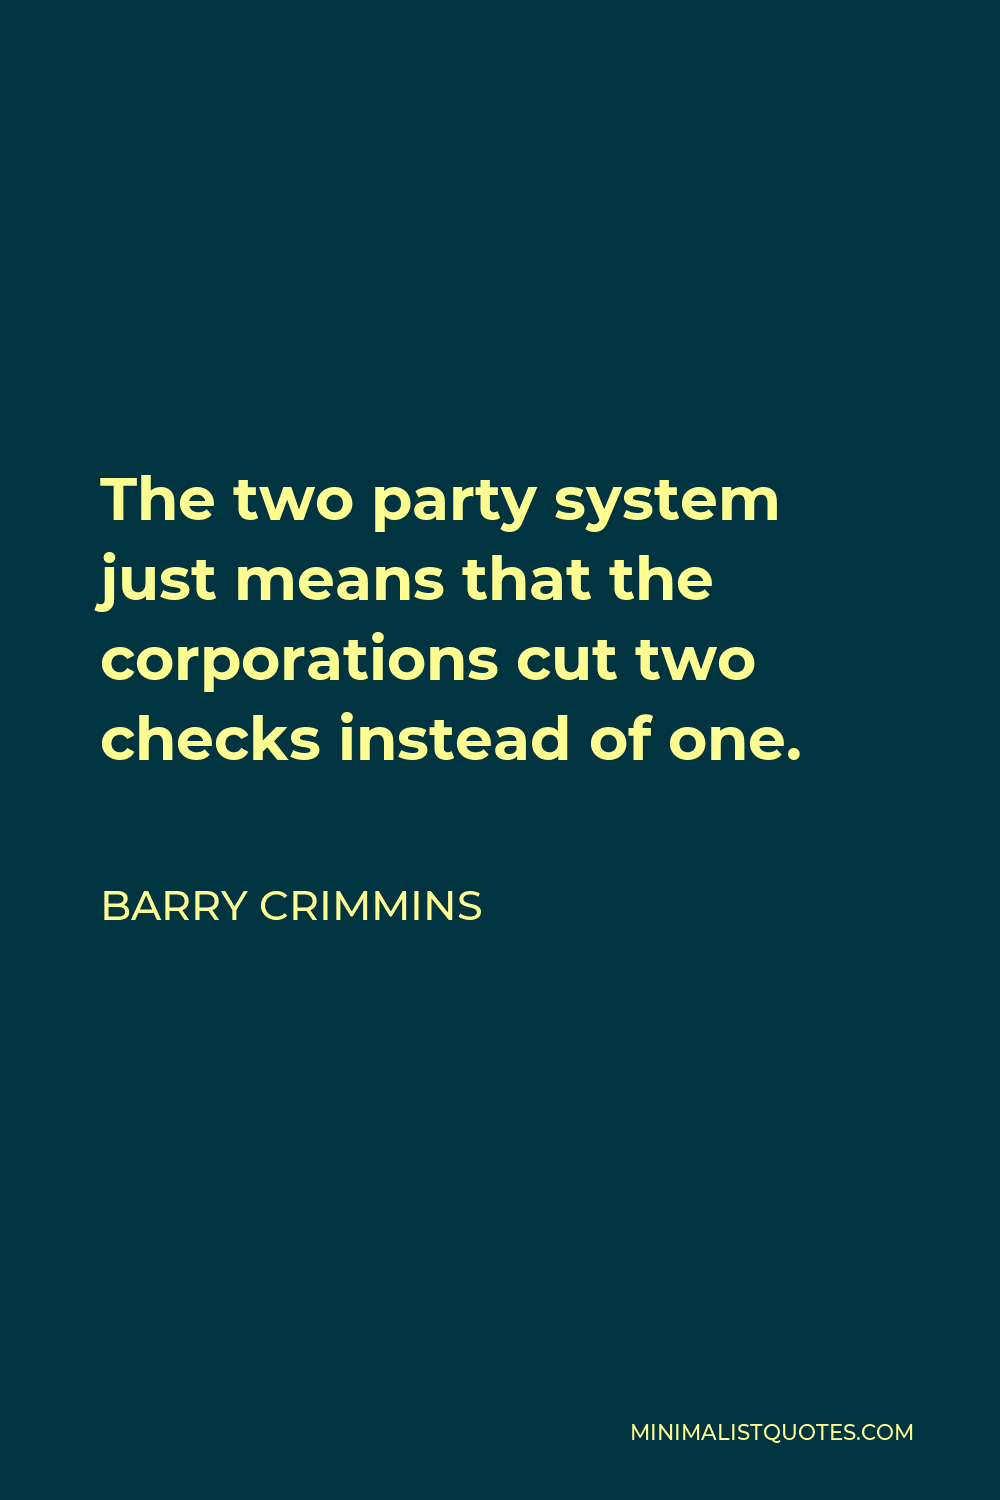 Barry Crimmins Quote - The two party system just means that the corporations cut two checks instead of one.